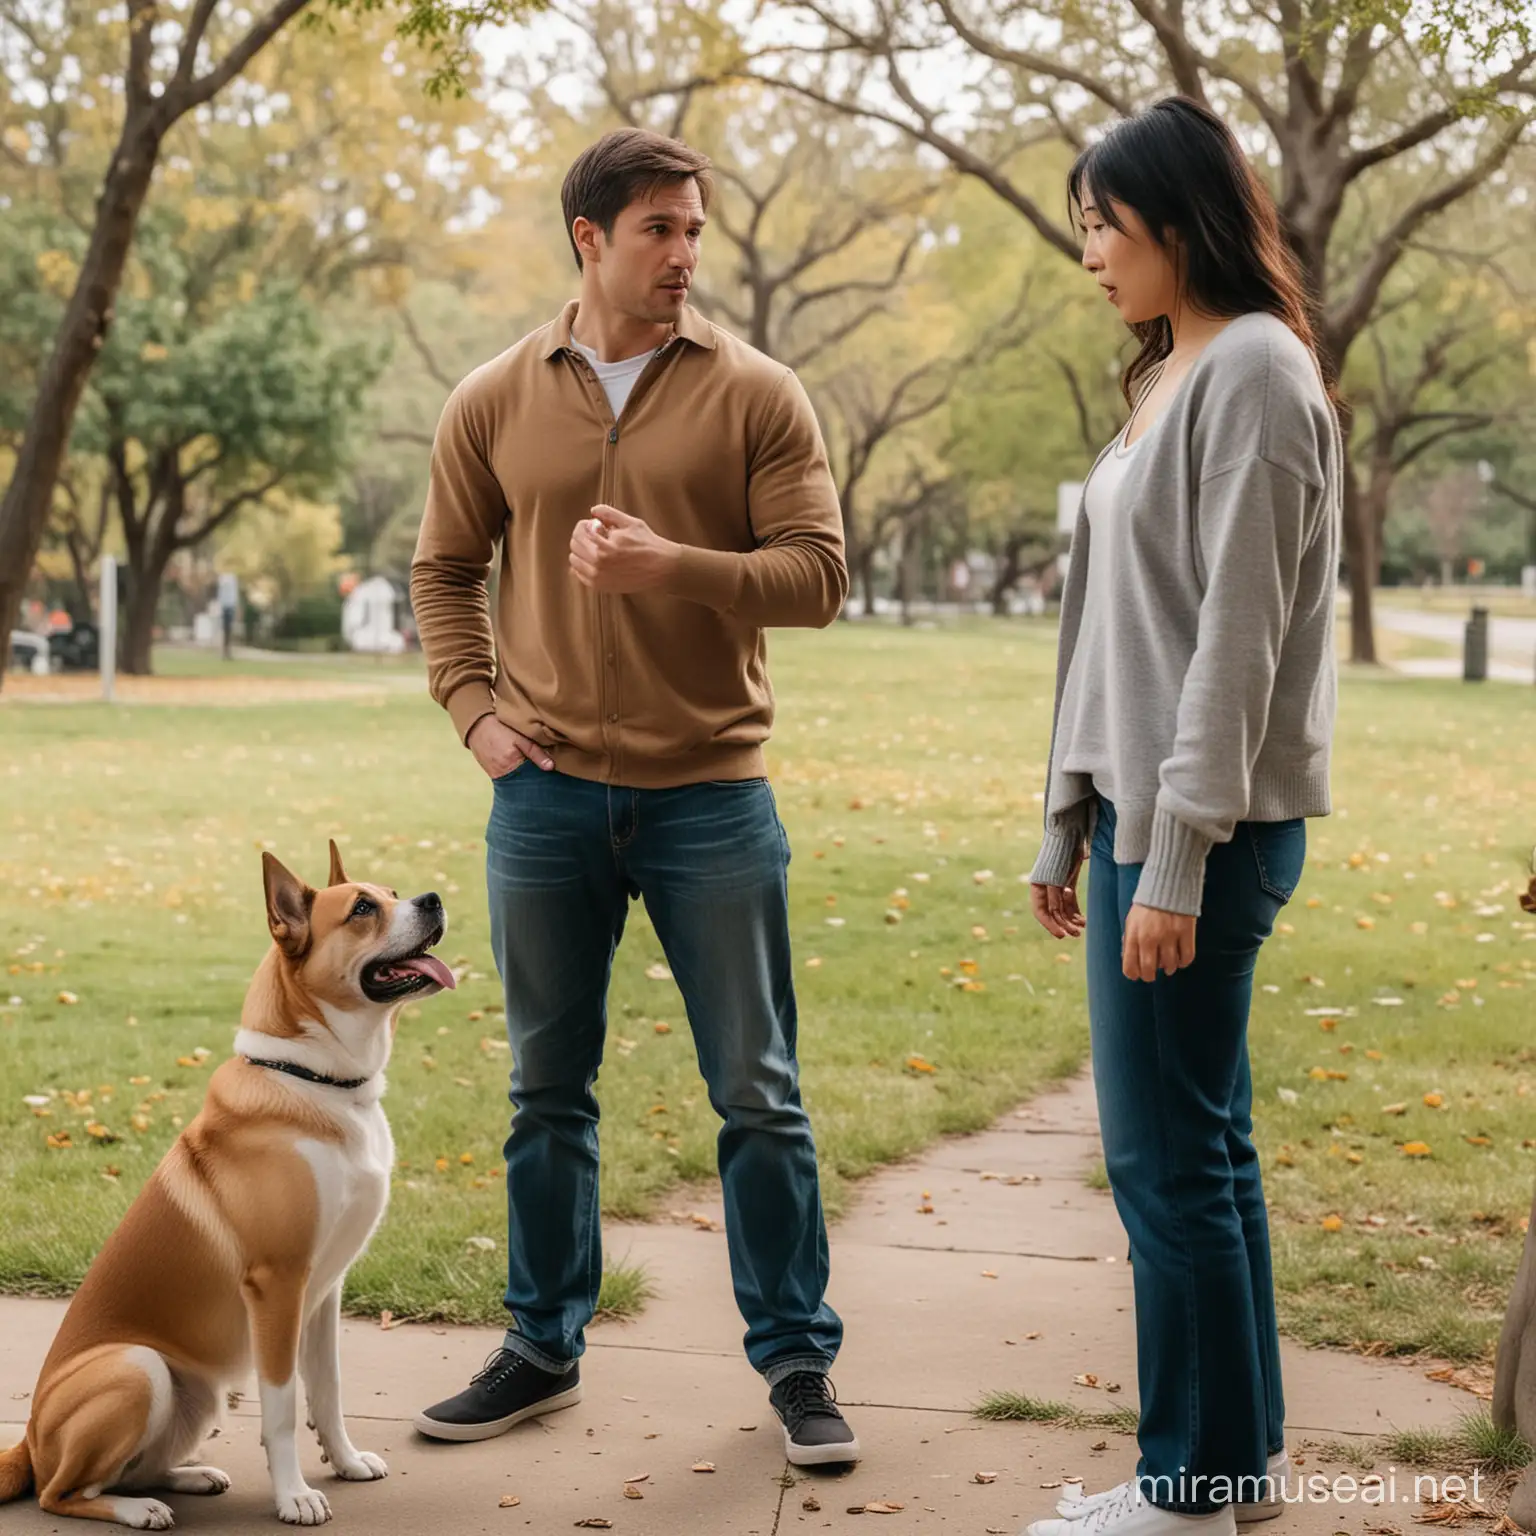 An attractive caucasian man and attractive asian woman  are arguing from about 5 feet apart. Both are approximately 30 years old.  Both look sad and upset. Their dog is nearby and seems uneasy because of the arguing.
